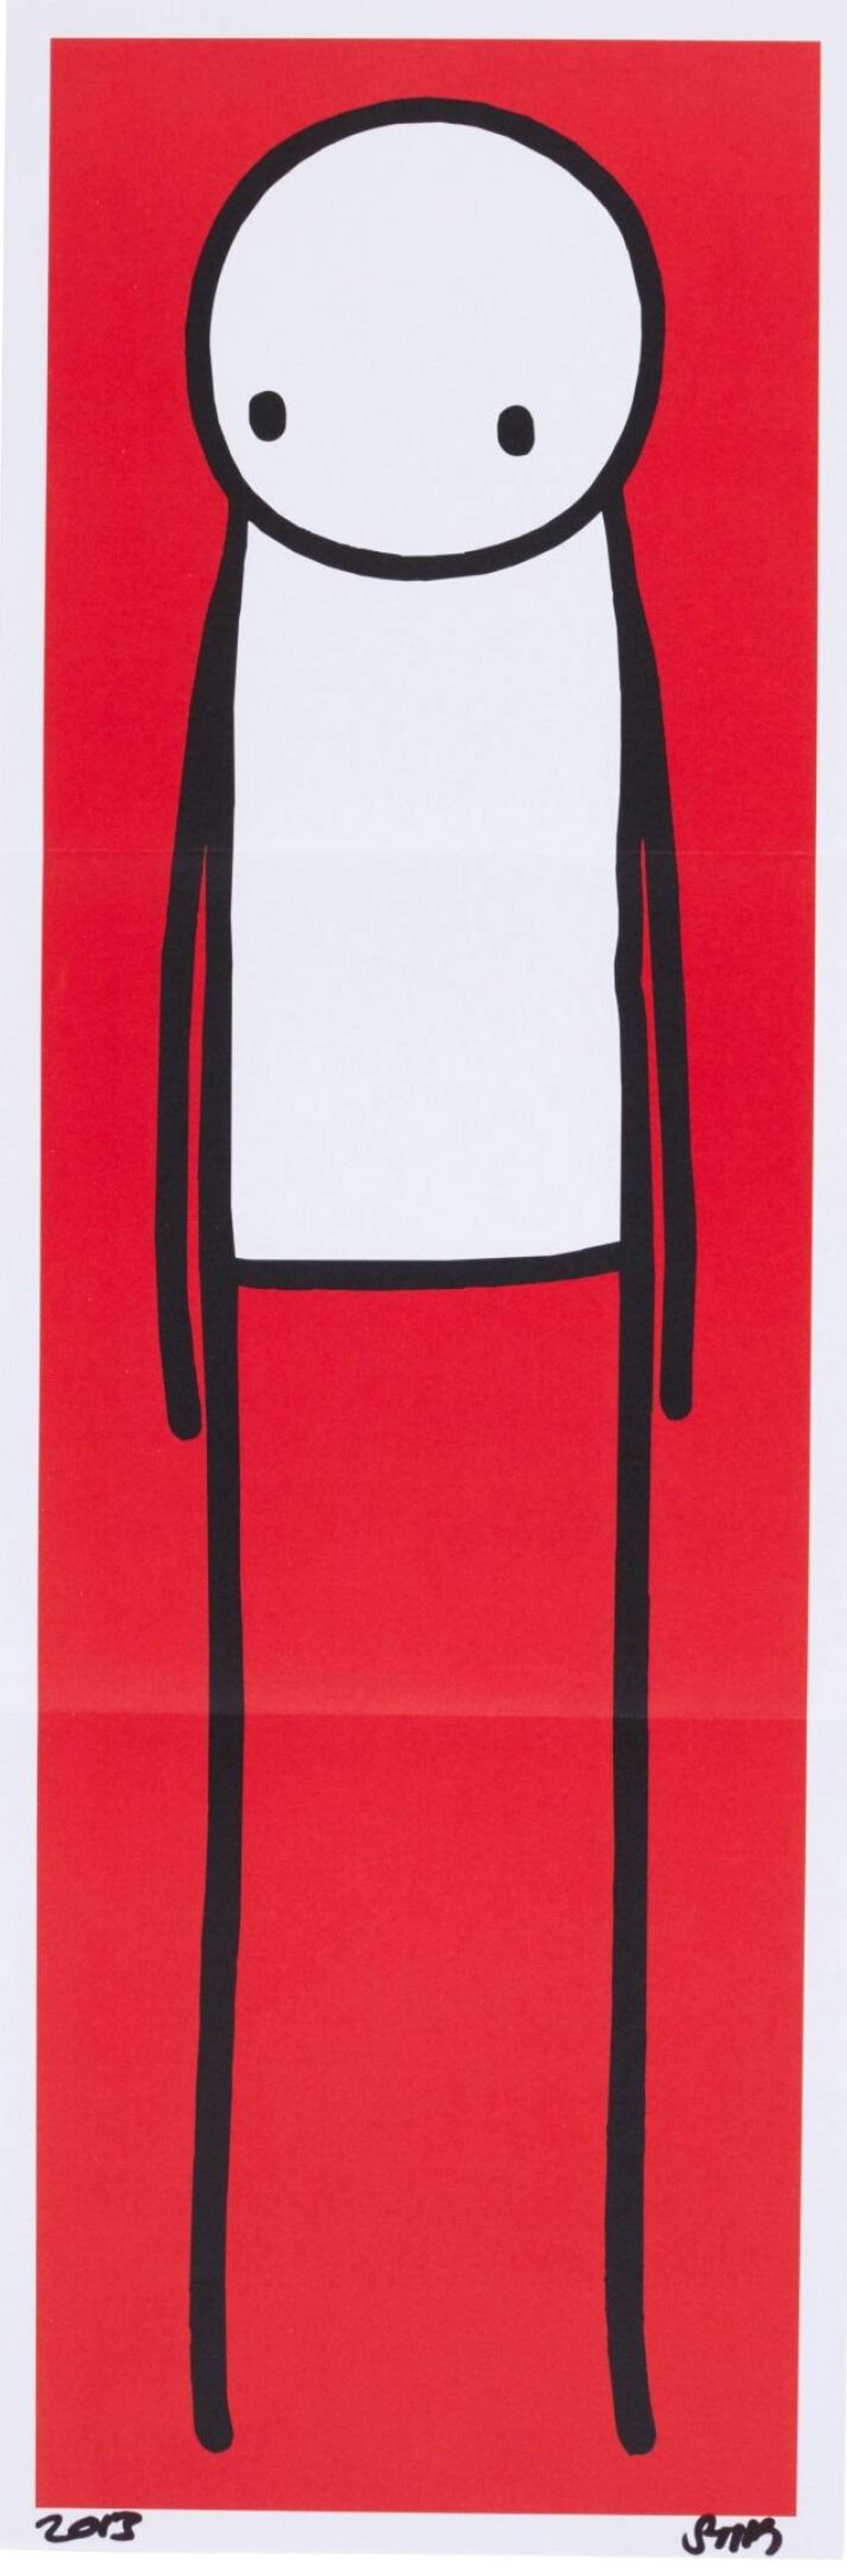 The Big Issue (red) by Stik